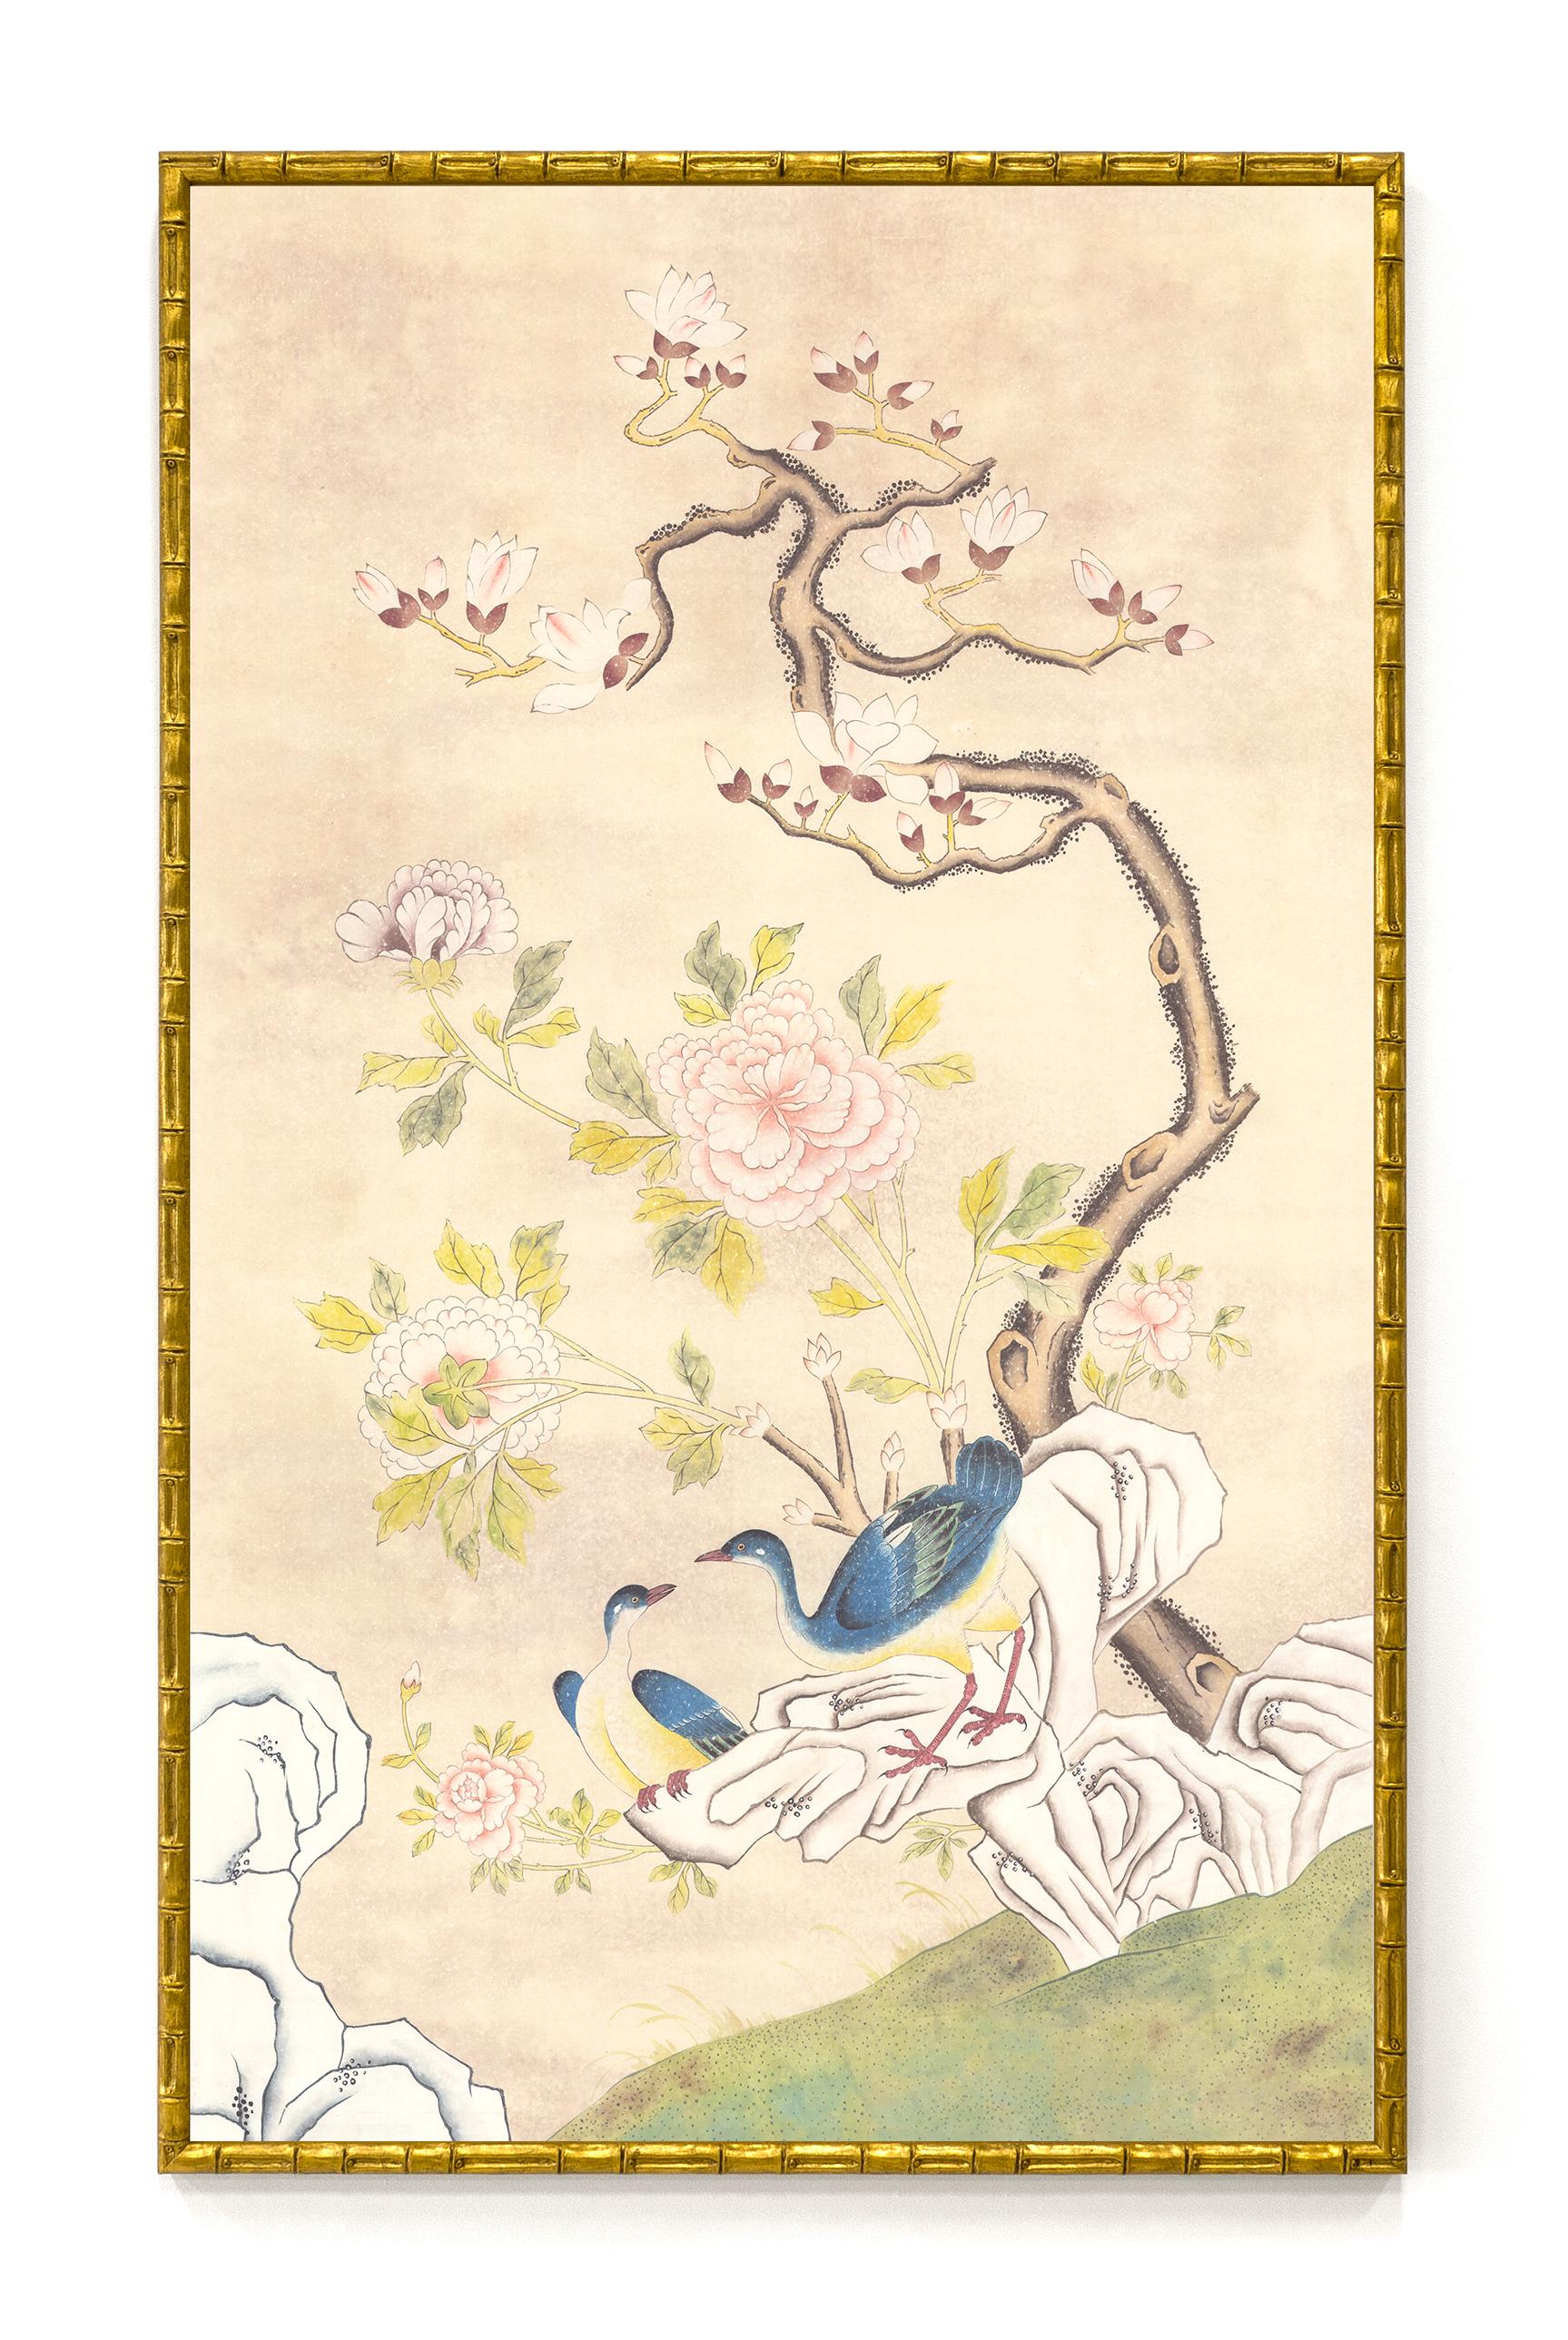 Summer Palace is a pair of hand painted pieces of artwork depicting exotic birds on stylized rock surround by trees. The artwork is hand painted using wash and opaques in a classic Chinoiserie style. These two art pieces have already been framed,